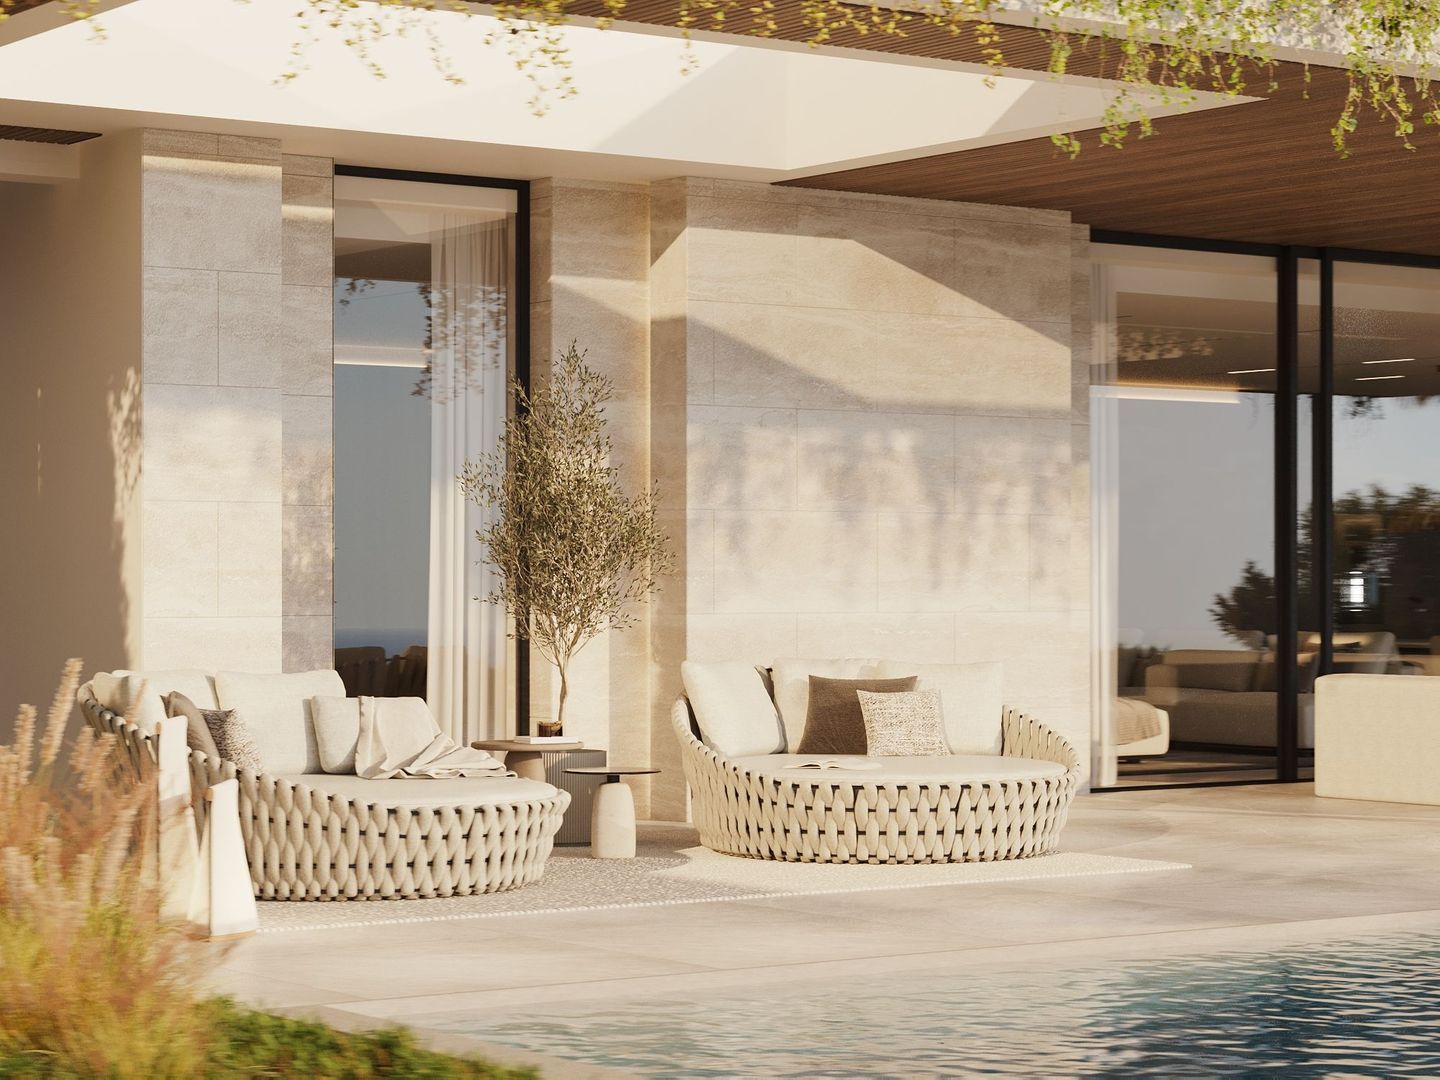 One of the most exciting property launches in Marbella, Benahavis foto-12